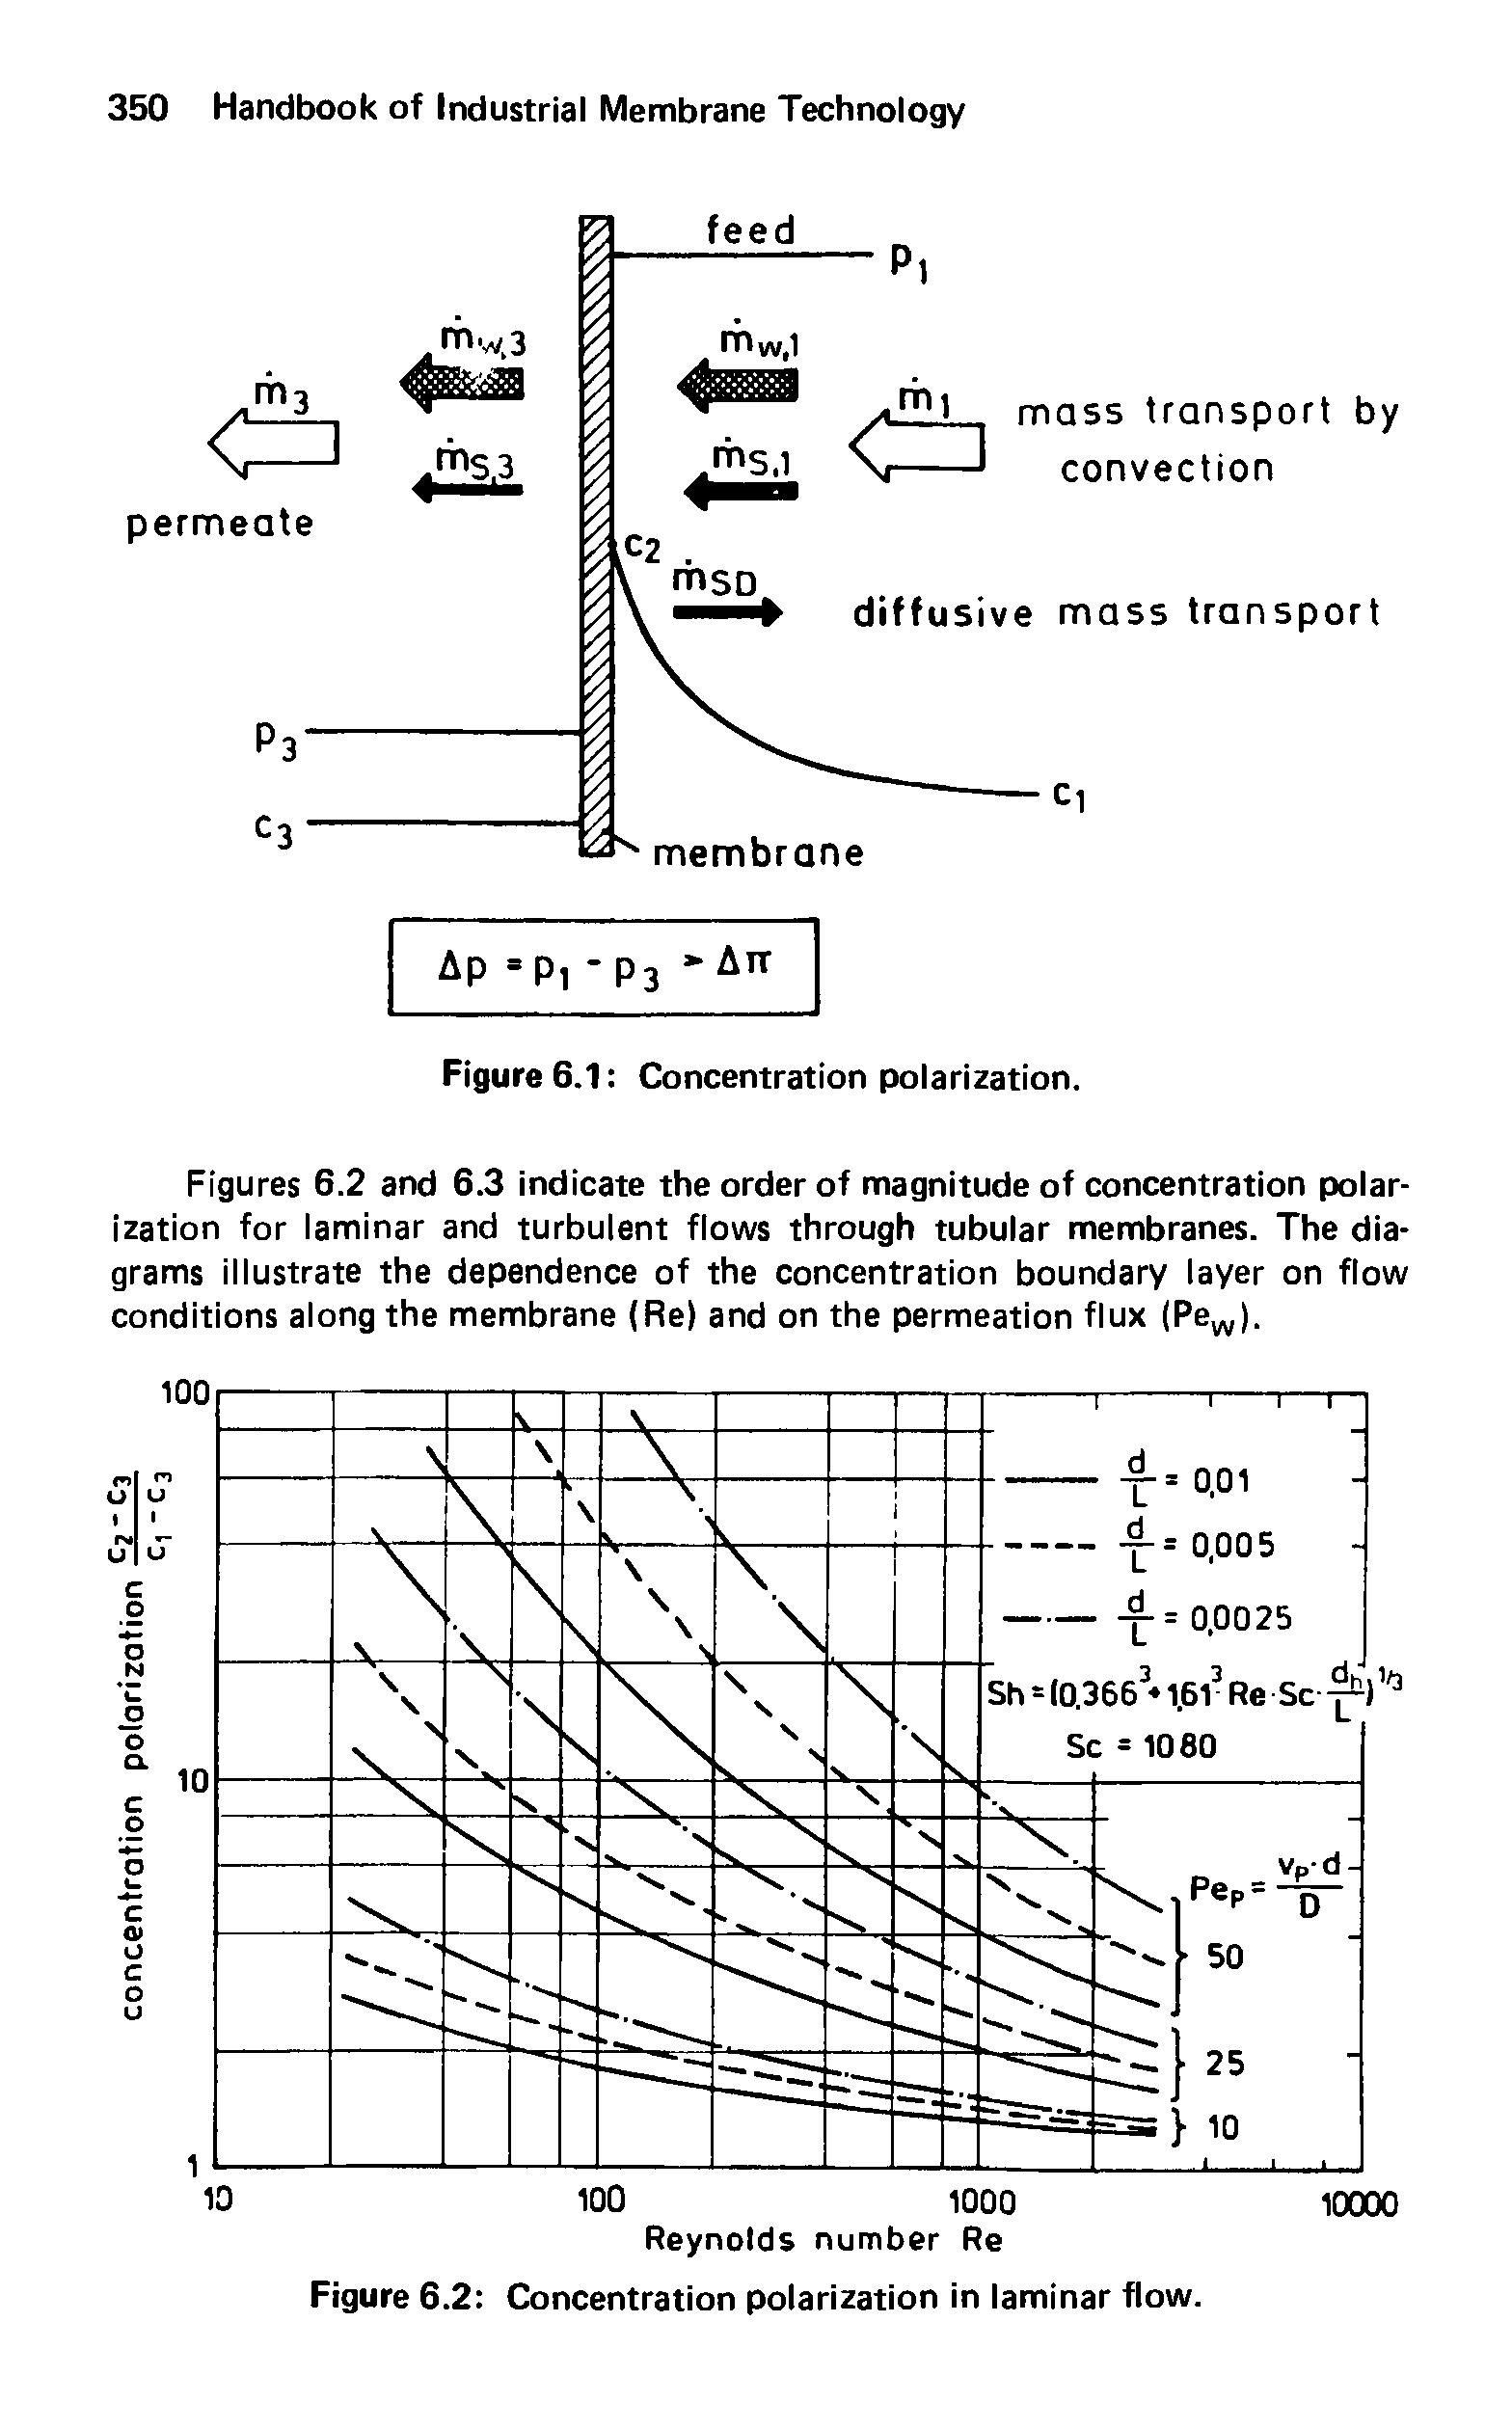 Figures 6.2 and 6.3 indicate the order of magnitude of concentration polarization for laminar and turbulent flows through tubular membranes. The diagrams illustrate the dependence of the concentration boundary layer on flow conditions along the membrane (Re) and on the permeation flux (Pew).